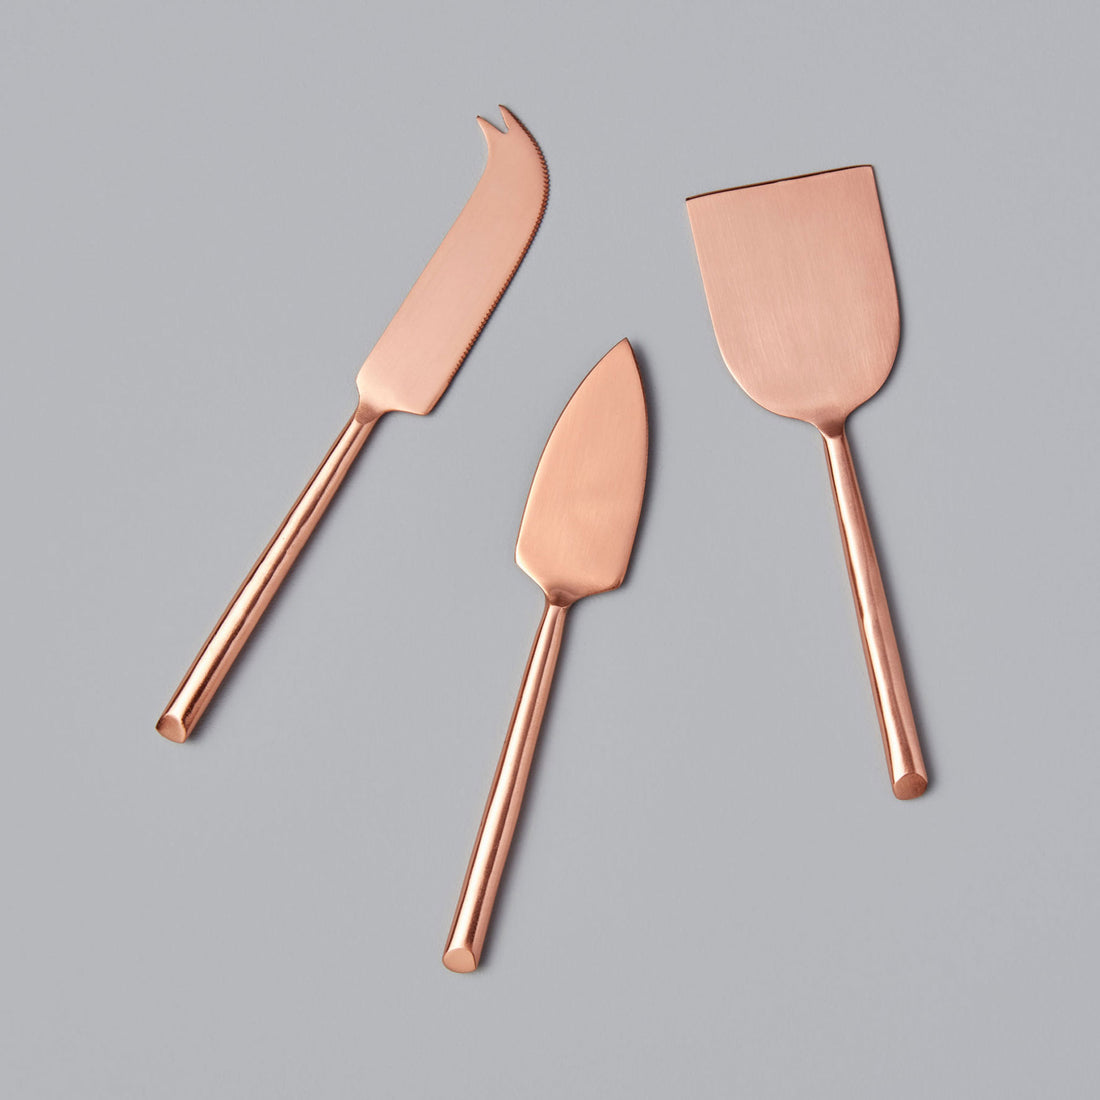 https://cdn.shopify.com/s/files/1/0376/0920/9900/products/Be-Home_Matte-Copper-Cheese-Set-of-3_25-1C.jpg?v=1606334003&width=1100